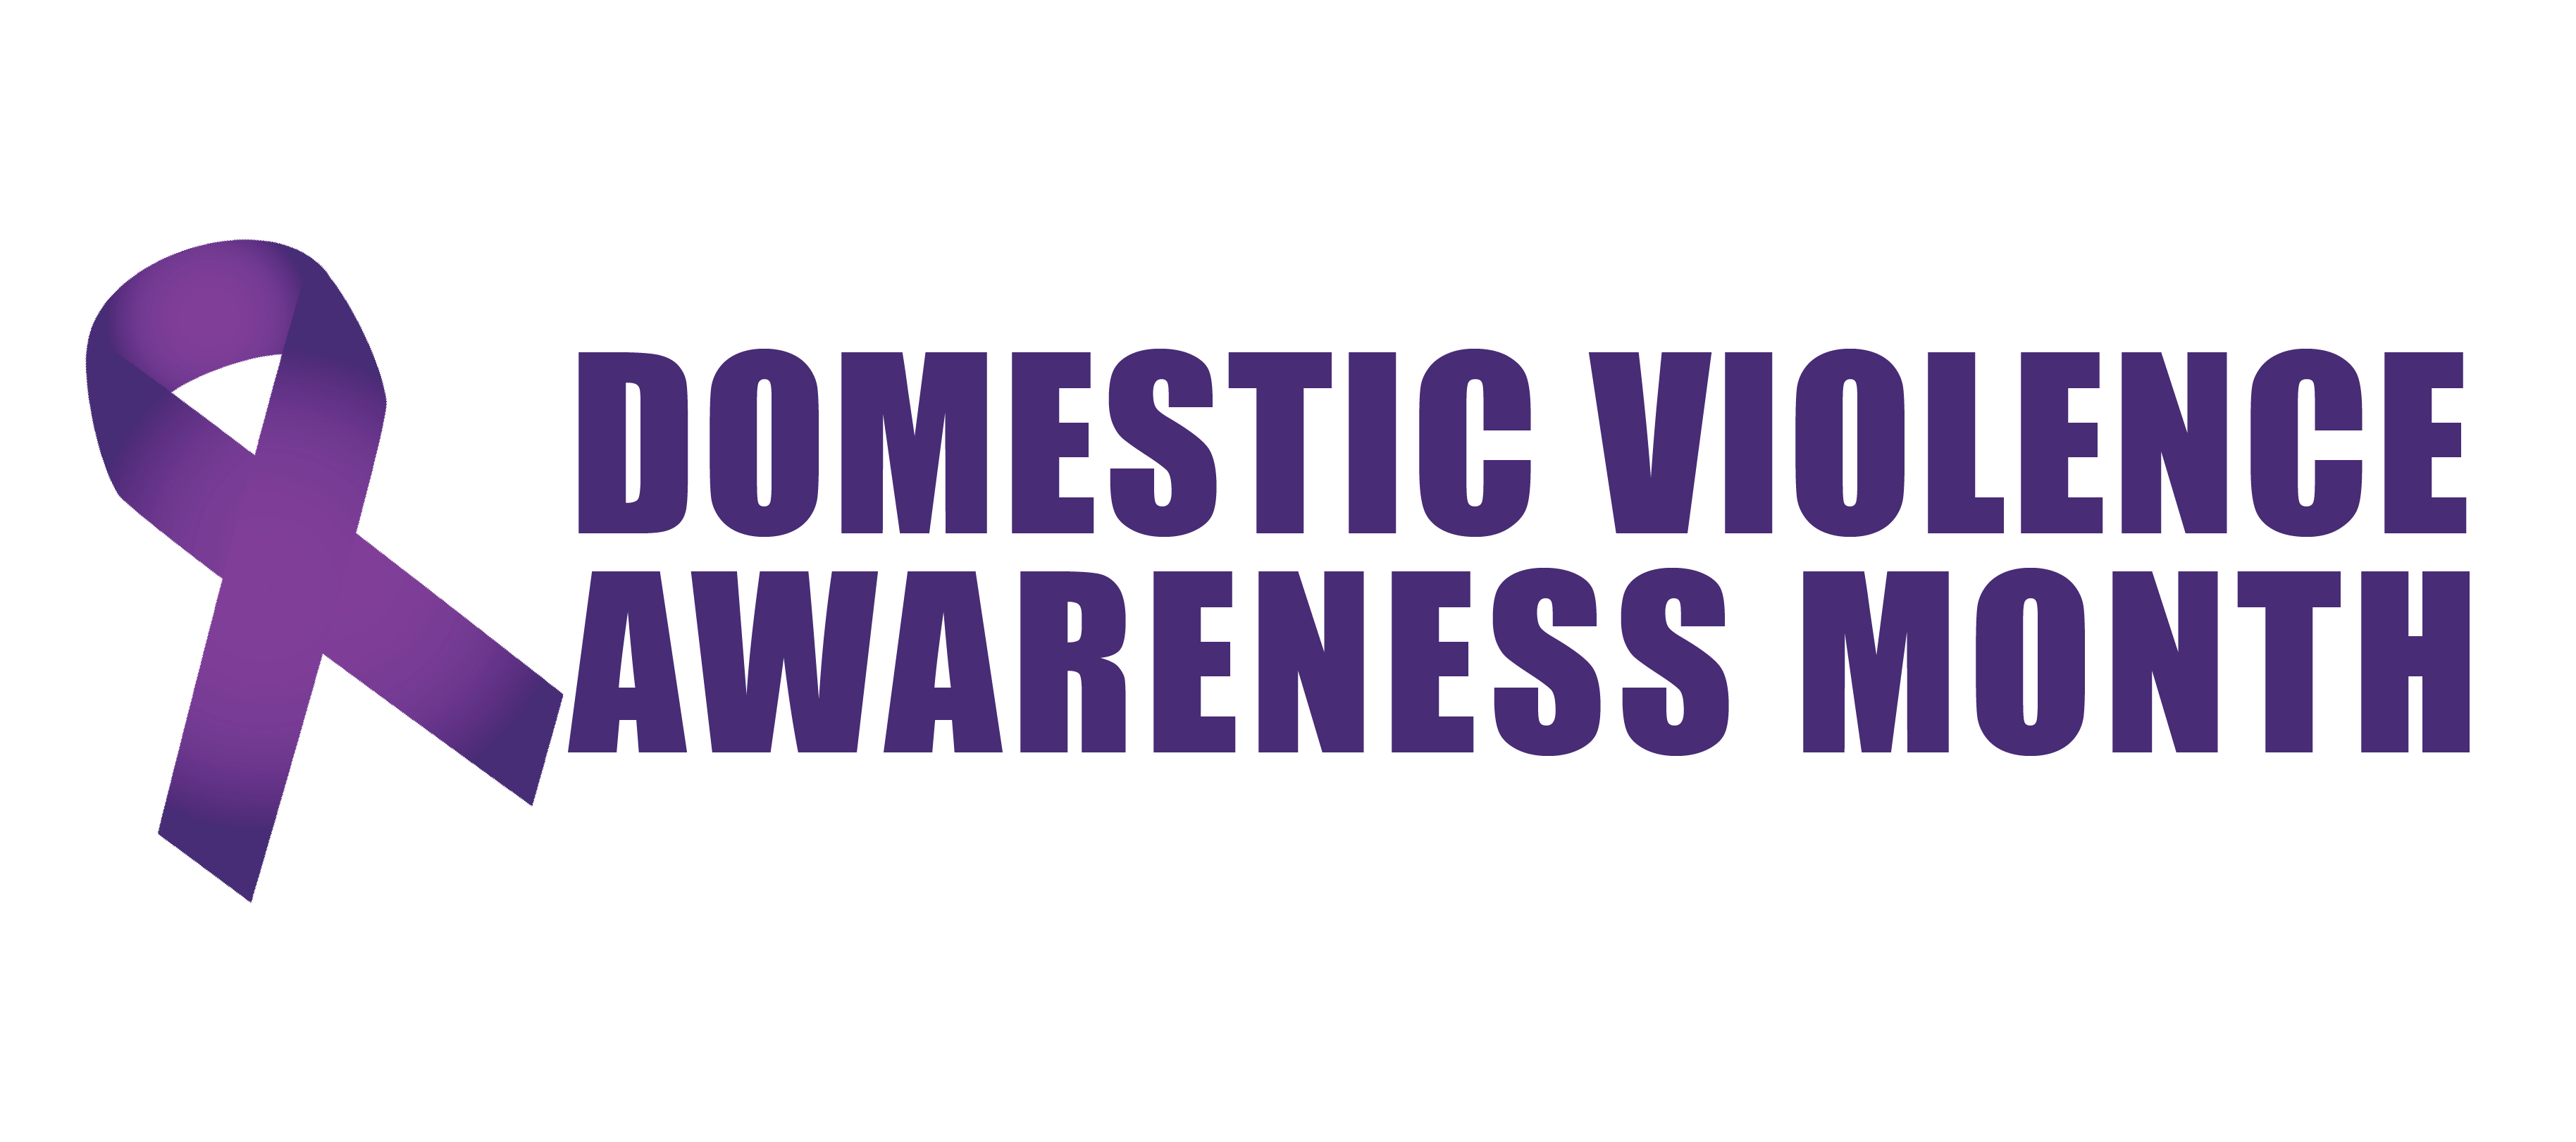 Domestic Violence Awareness Month (Oct21) - Equity, Diversity ...